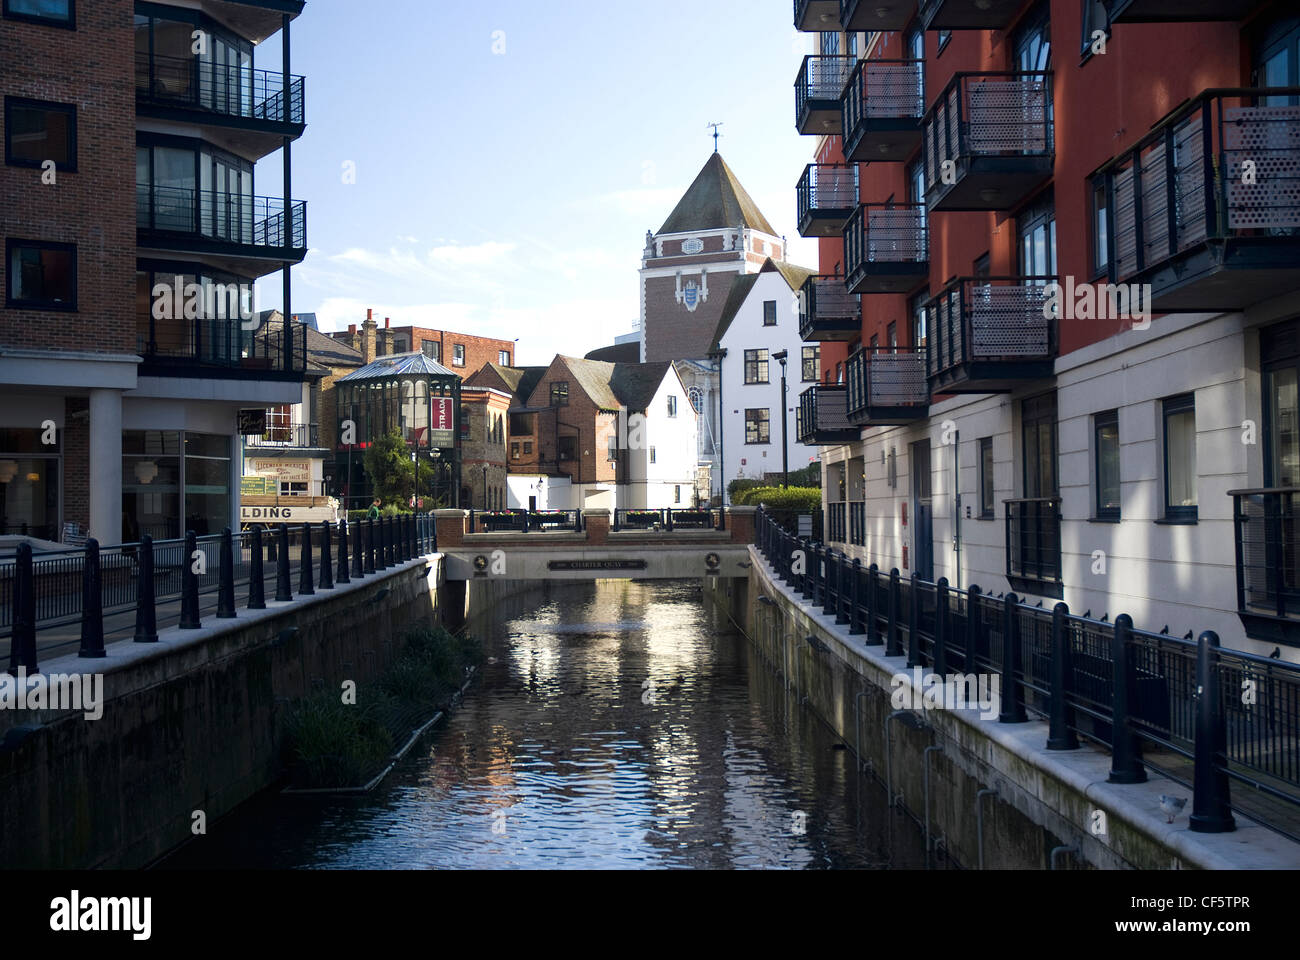 The Charter Quay riverside development combining homes, shops, restaurants and a theatre in Kingston upon Thames. Stock Photo